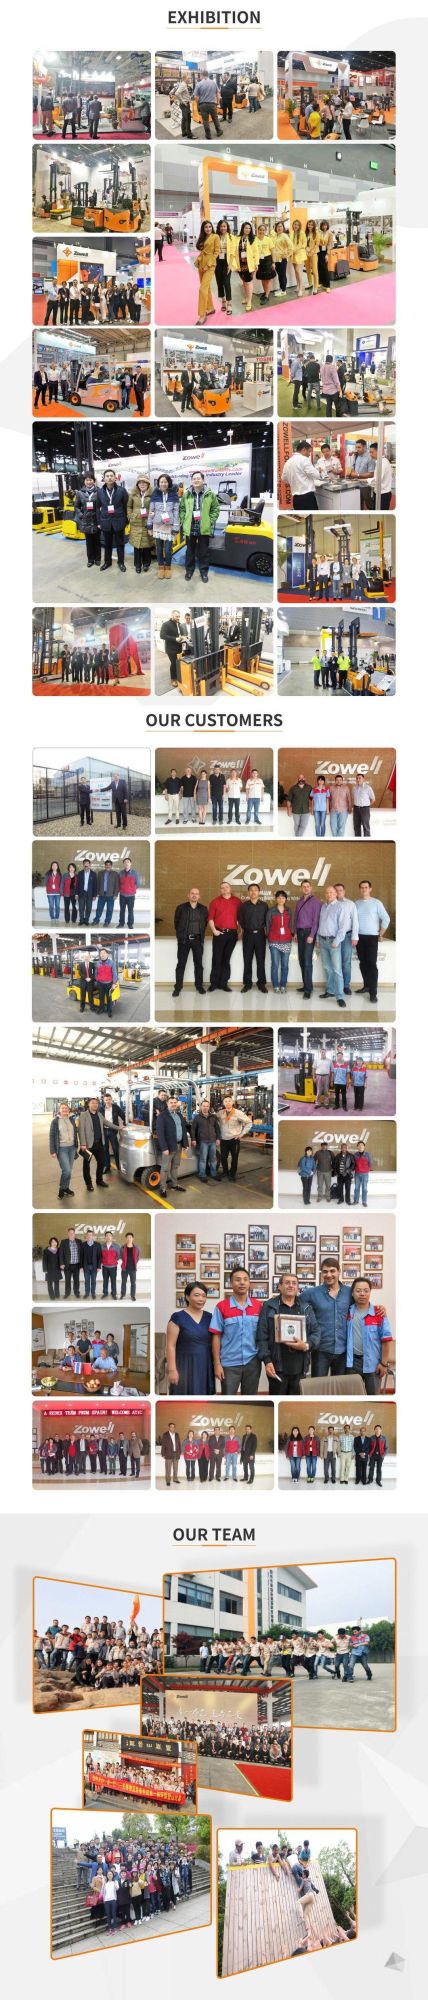 Zowell Wooden Suzhou, China Hand Truck 12t Pallet Jack XP120